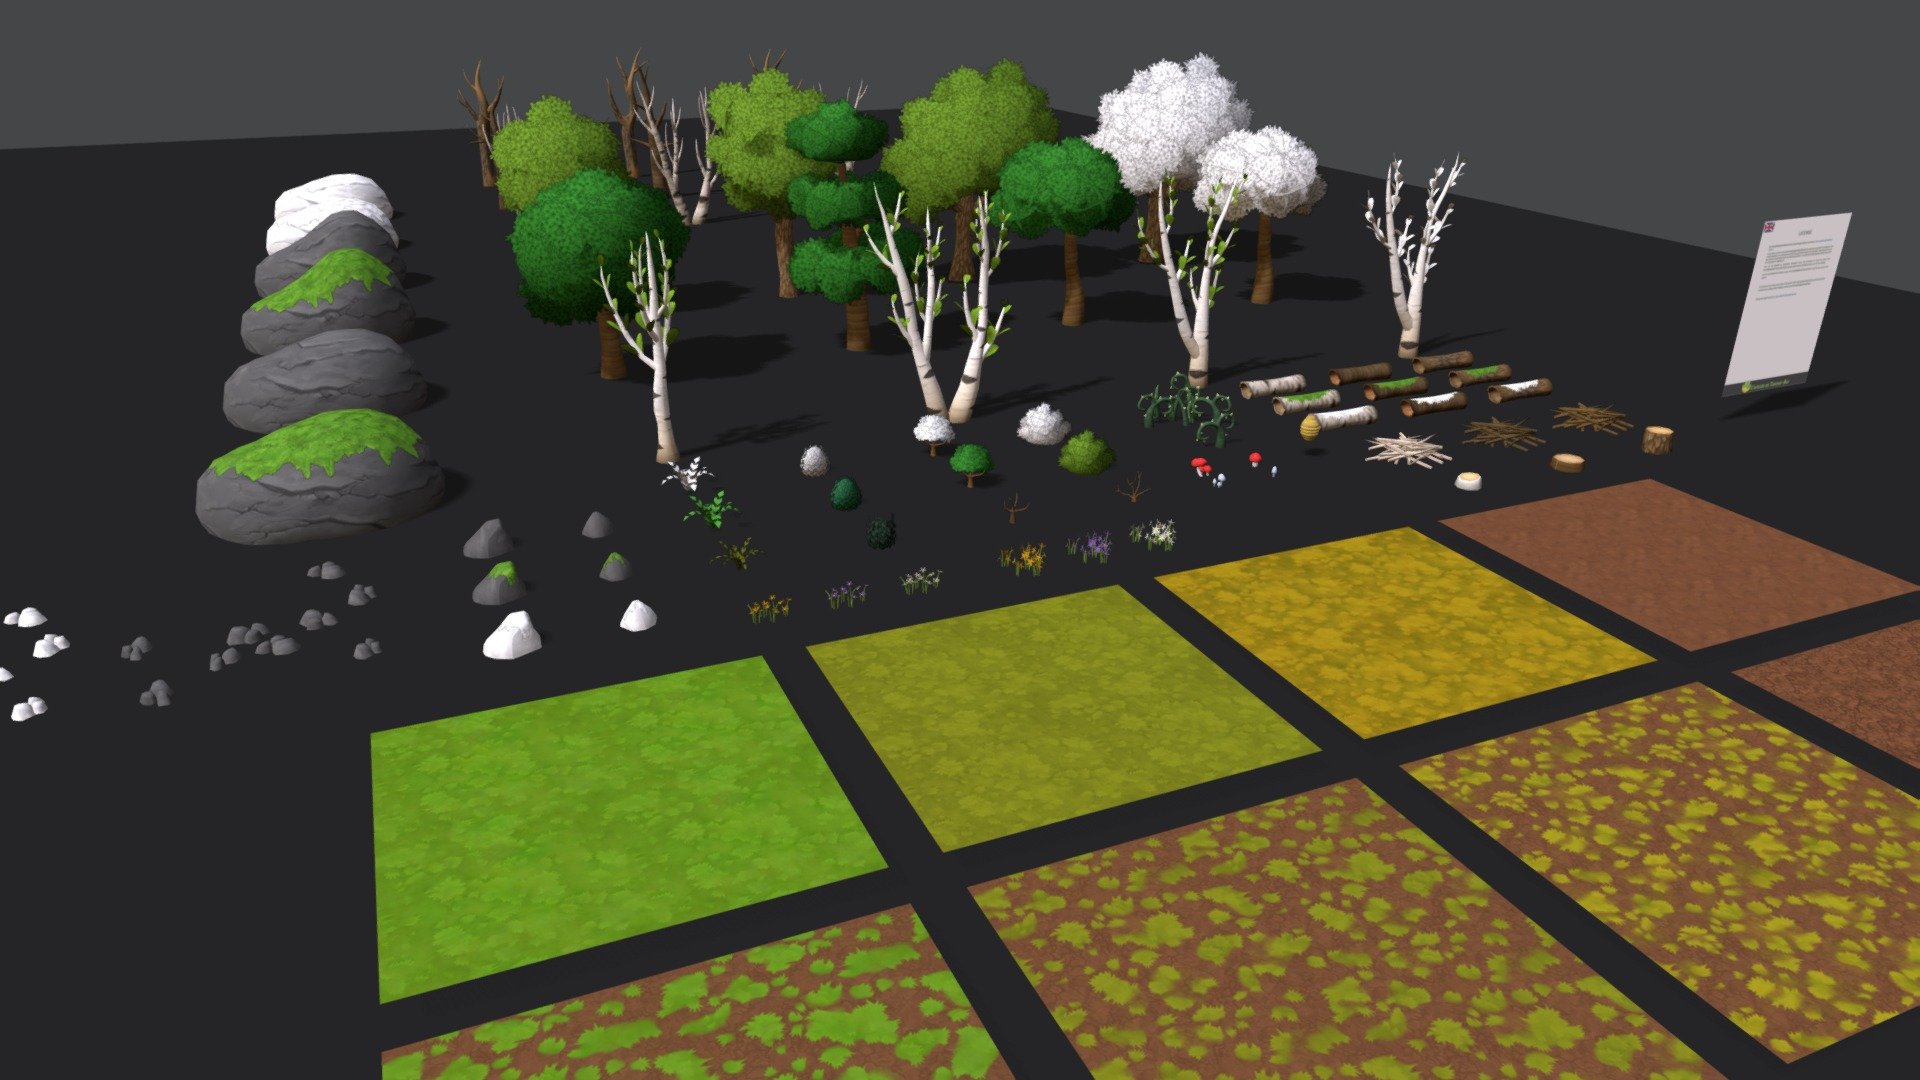 This package allows you to build different forests.



OPTIMIZED PC (LOD for all assets)

COLOR CUSTOMIZATION: White textures allow you to apply the color you want if your shaders allow it or from Photoshop.

See the trailer realized with Unity here


Textures



17 Atlases of textures

8 Tileable textures


Package contains 59 meshes
PROPS




1 Hive, 3 Pile of branches (beech, birch, oak), 3 TreeStump (beech, birch, oak), 3 TreeTrunk (beech, birch, oak), 3 TreeTrunk_Moss (beech, birch, oak).

ROCKS




RockBig_A and RockBig_B, RockBig_A_Moss and RockBig_B_Moss, RockLittle_A , RockLittle_A_Moss, RockLittle_B, RockLittle_B_Moss, RockLittle_C, RockLittle_C_GRP

TREES




3 Beeches, 3 Birches, 3 Oaks, 3 Dead Beeches, 3 Dead Birches, 3 Dead Oaks.

VEGETATION




2 Brambles, 3 bushes, 3 Dead Bushes, 1 Fern, 1 Dead Fern, 6 groups of flowers, 4 Mushrooms

License included in texture  for clarity - Handpainted Forest Pack - Buy Royalty Free 3D model by Taryne-Aly 3d model